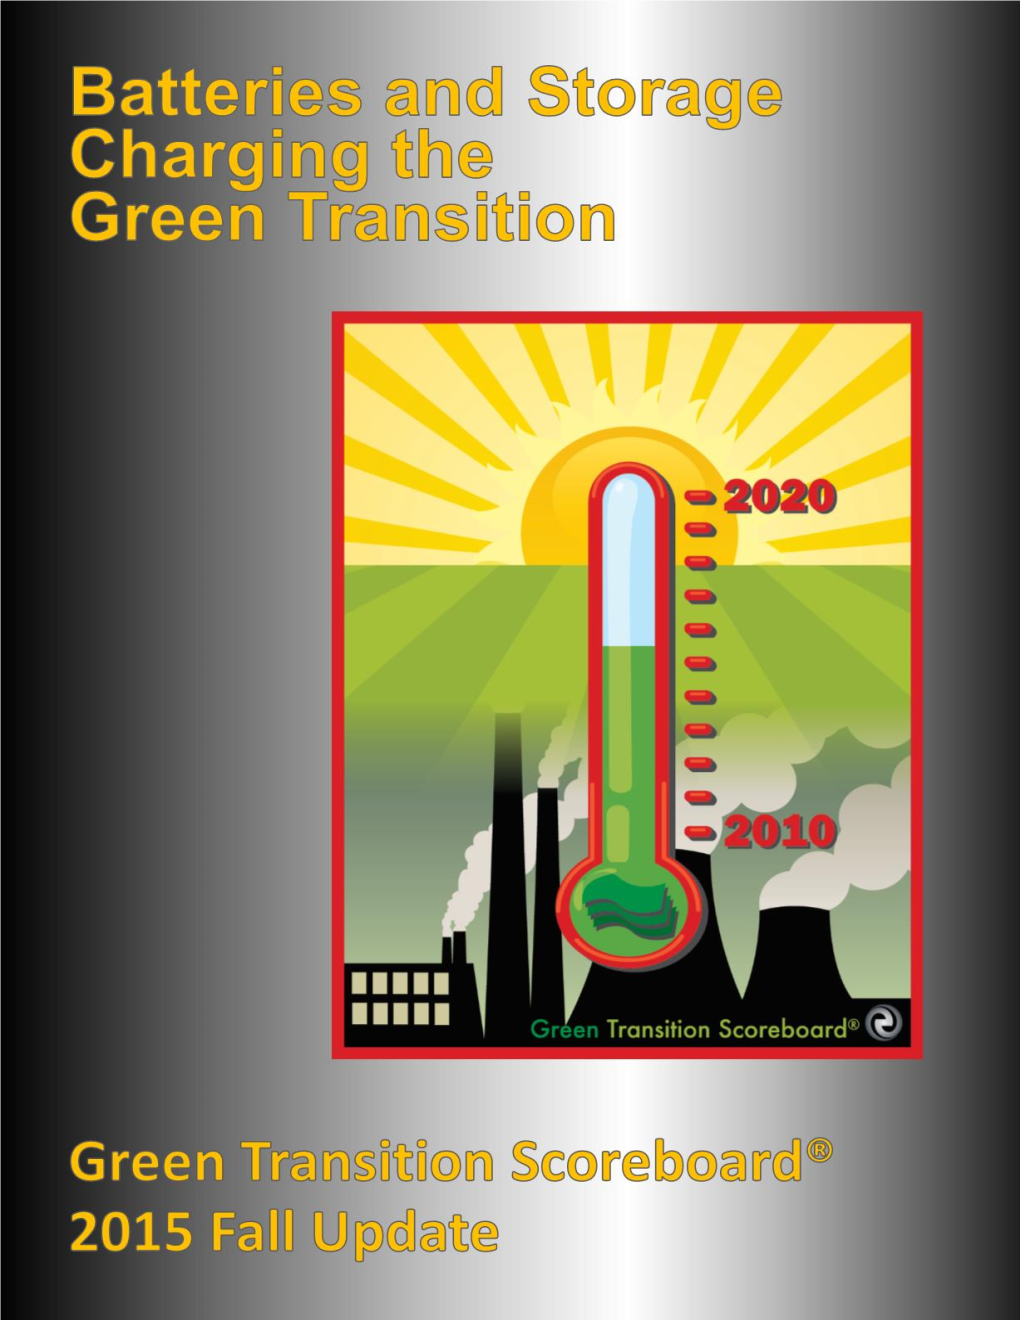 Batteries and Storage Charging the Green Transition: Green Transition Scoreboard® 2015 Fall Update